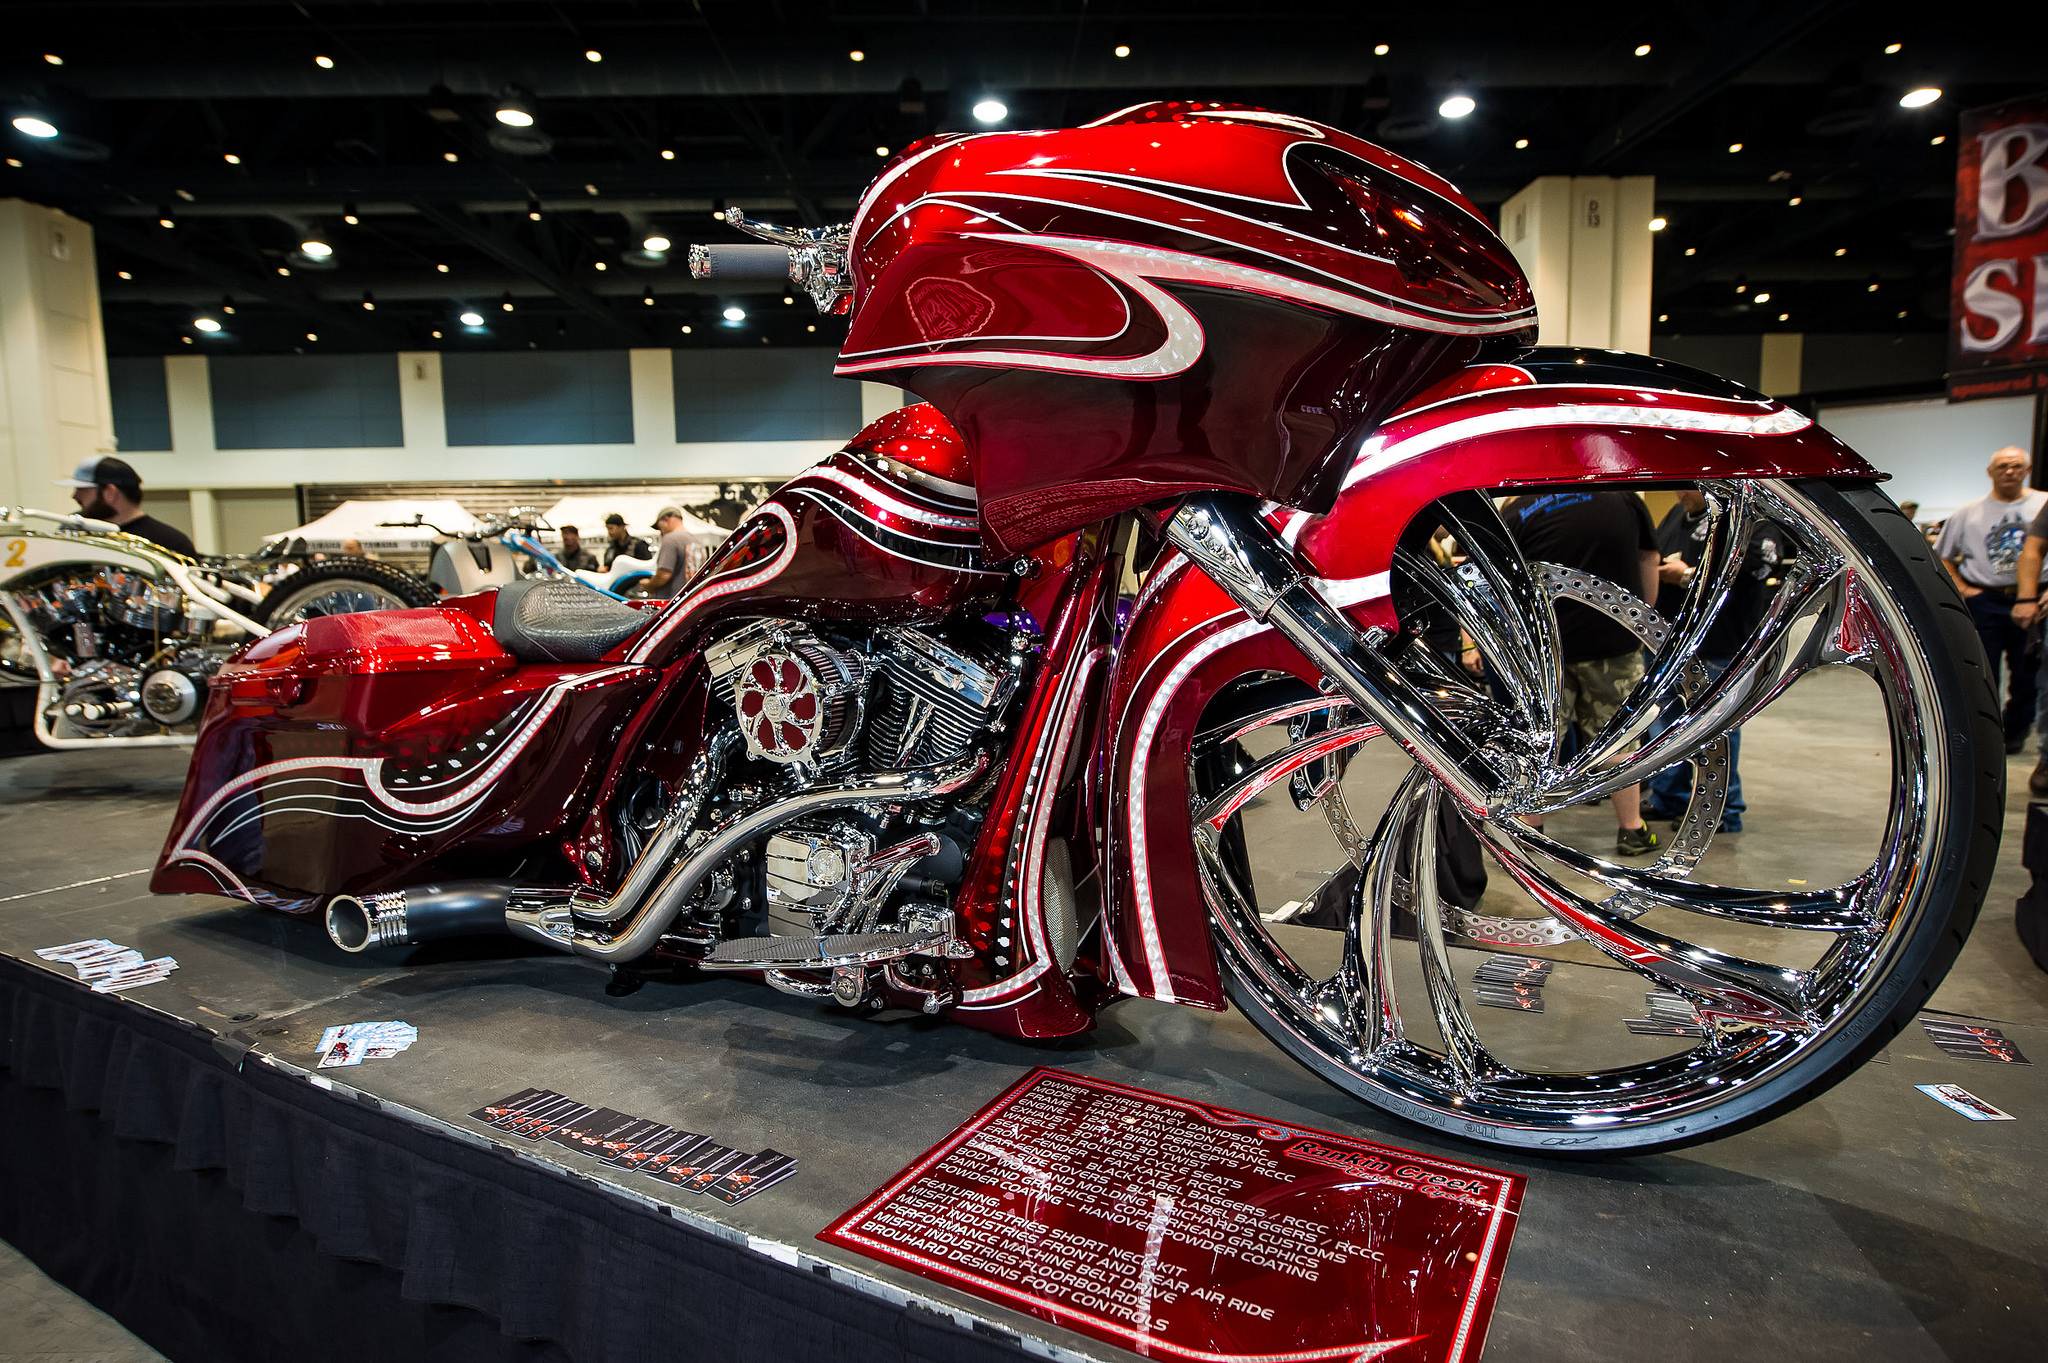 Ray Price Capital City Bikefest To Showcase Unique Collection Of Motorcycles From Top Custom Builders